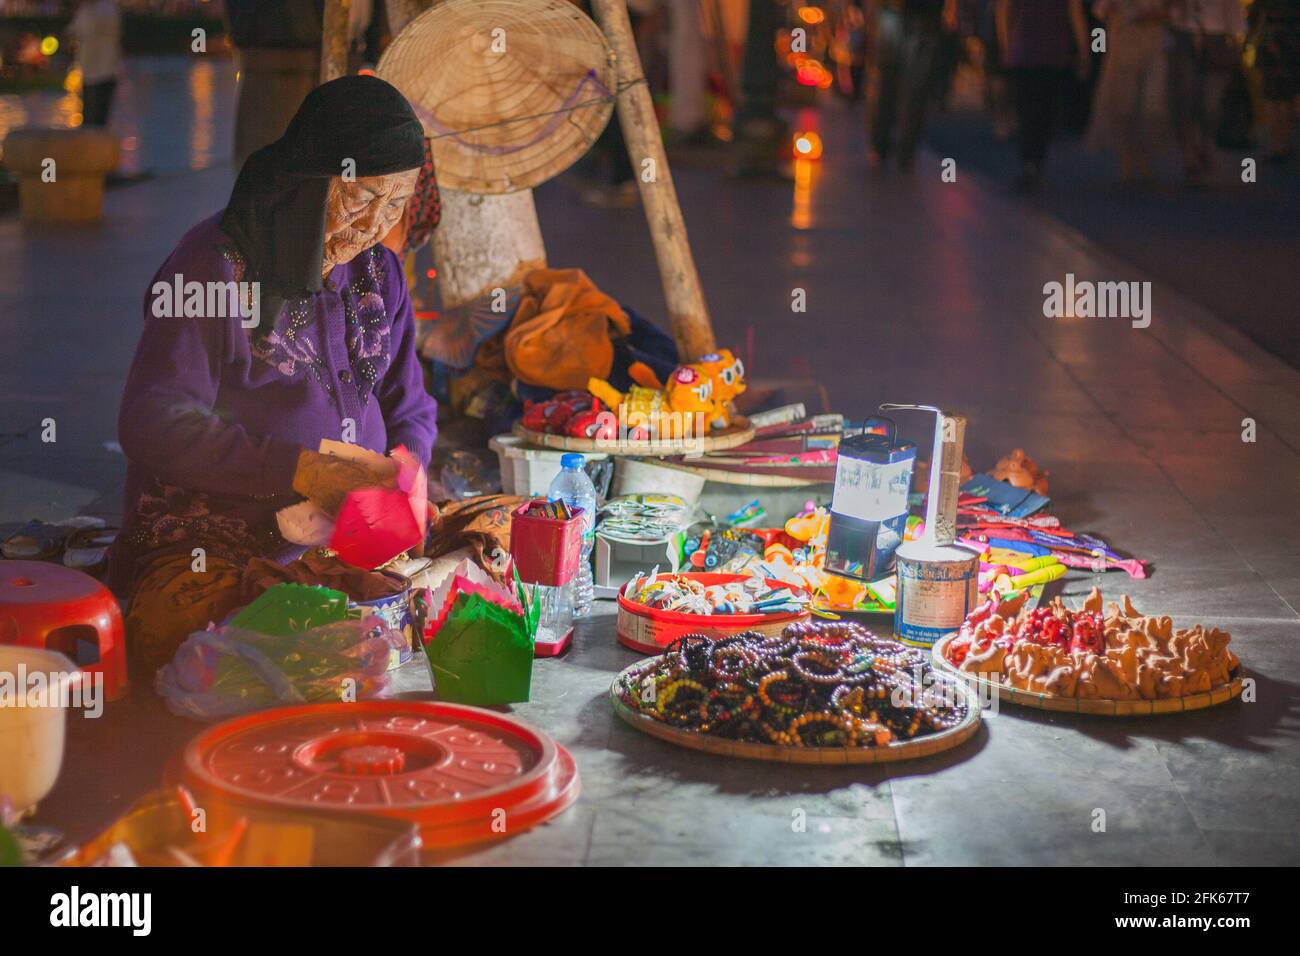 Elderly Vietnamese lady selling colourful floating lanterns and other tourist gifts, Old Town, Hoi An, Vietnam Stock Photo